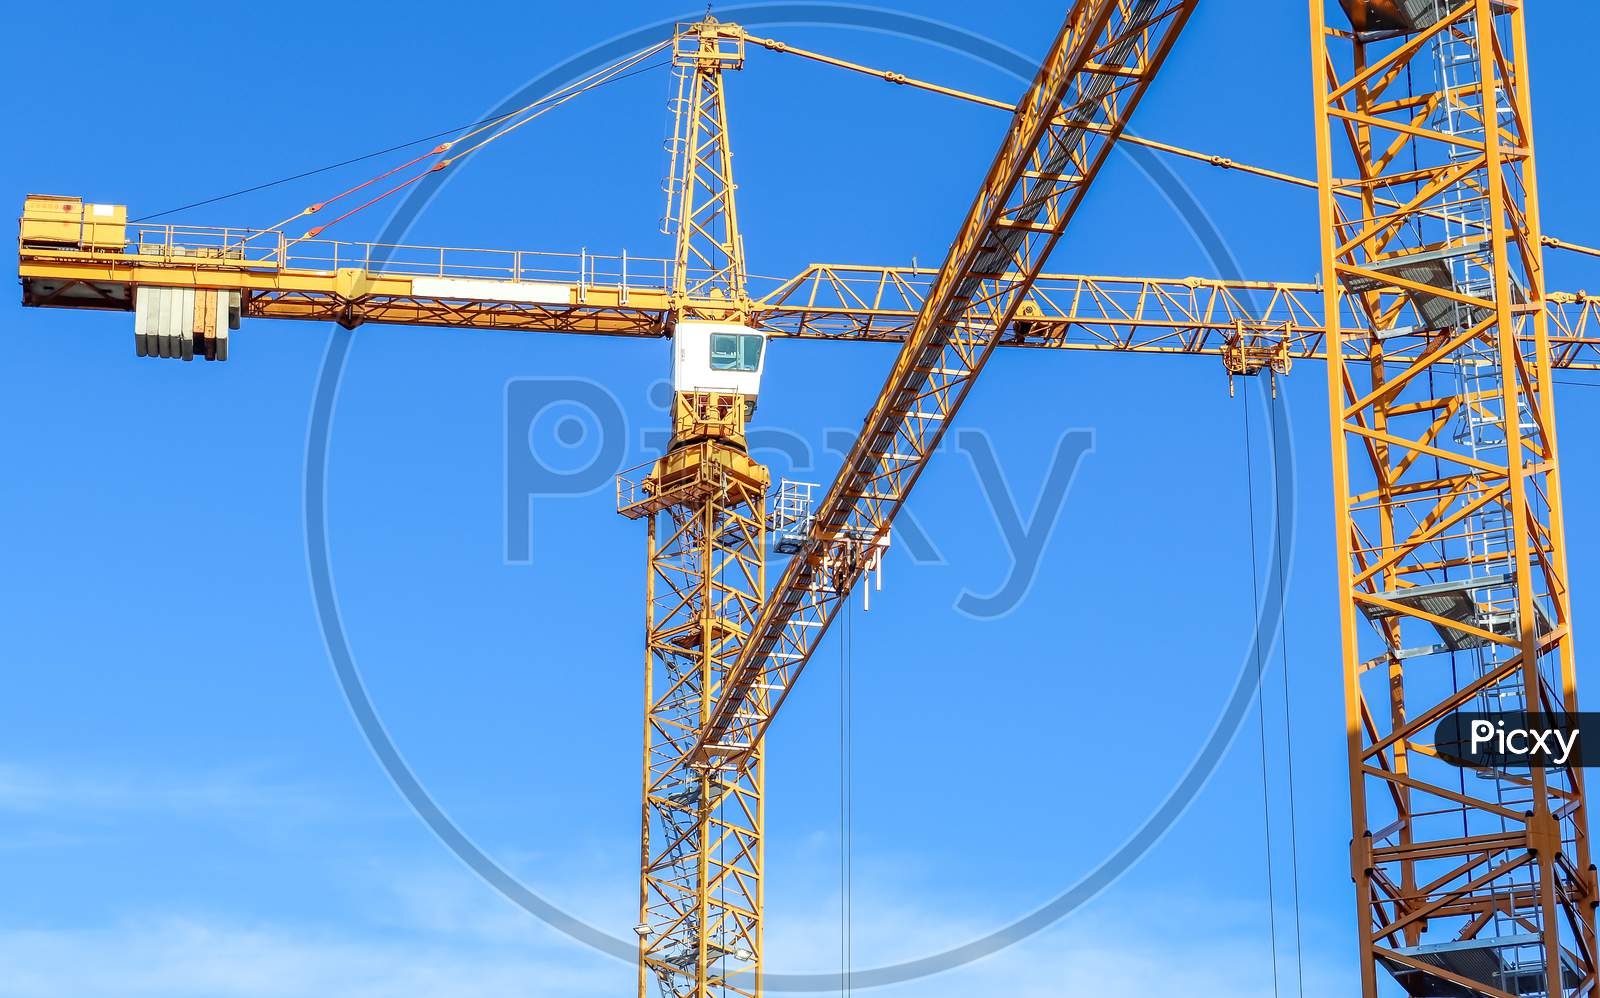 Big yellow cranes at a construction site on a sunny day